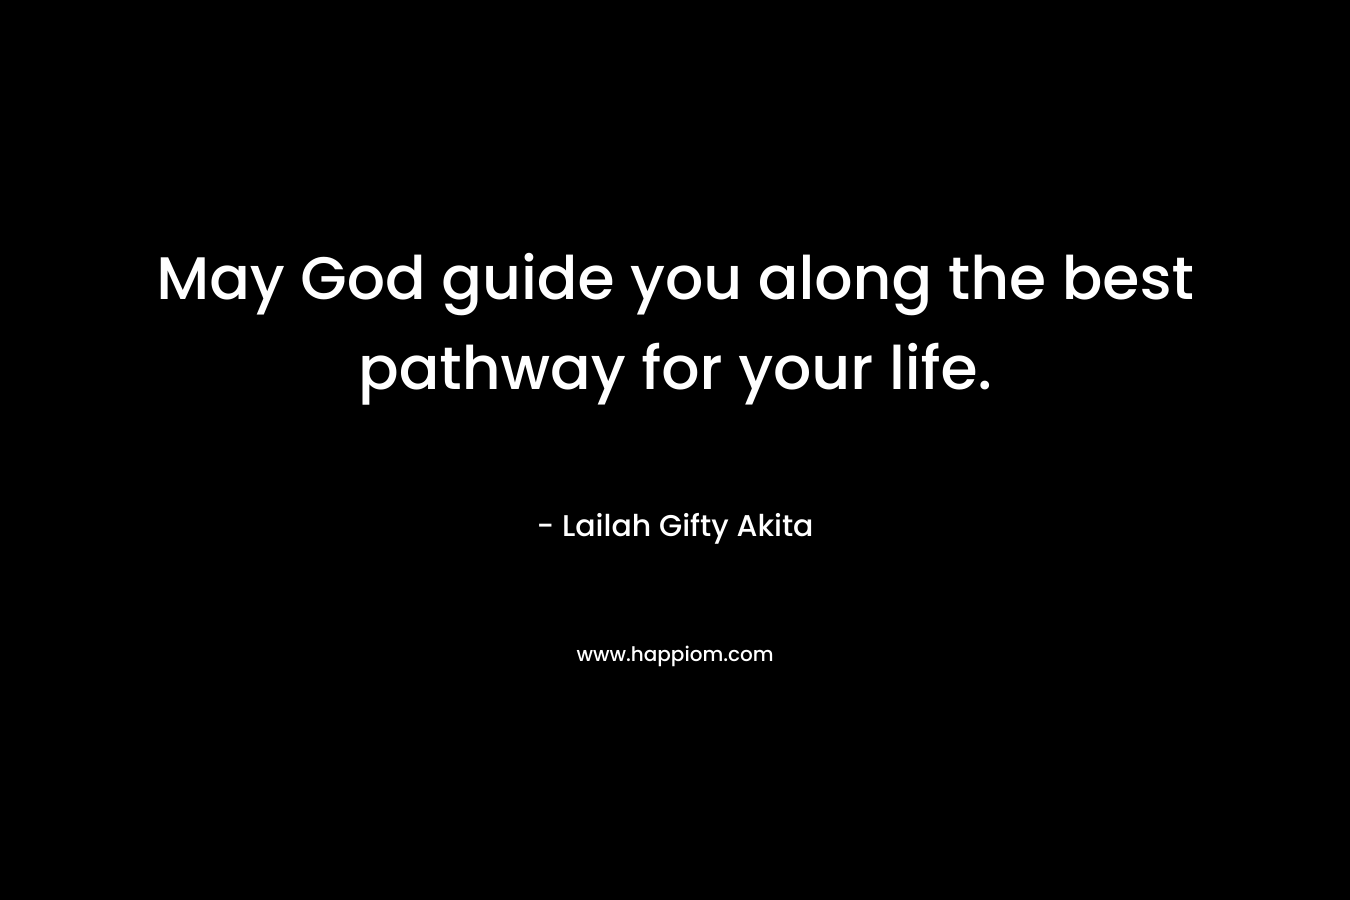 May God guide you along the best pathway for your life. – Lailah Gifty Akita